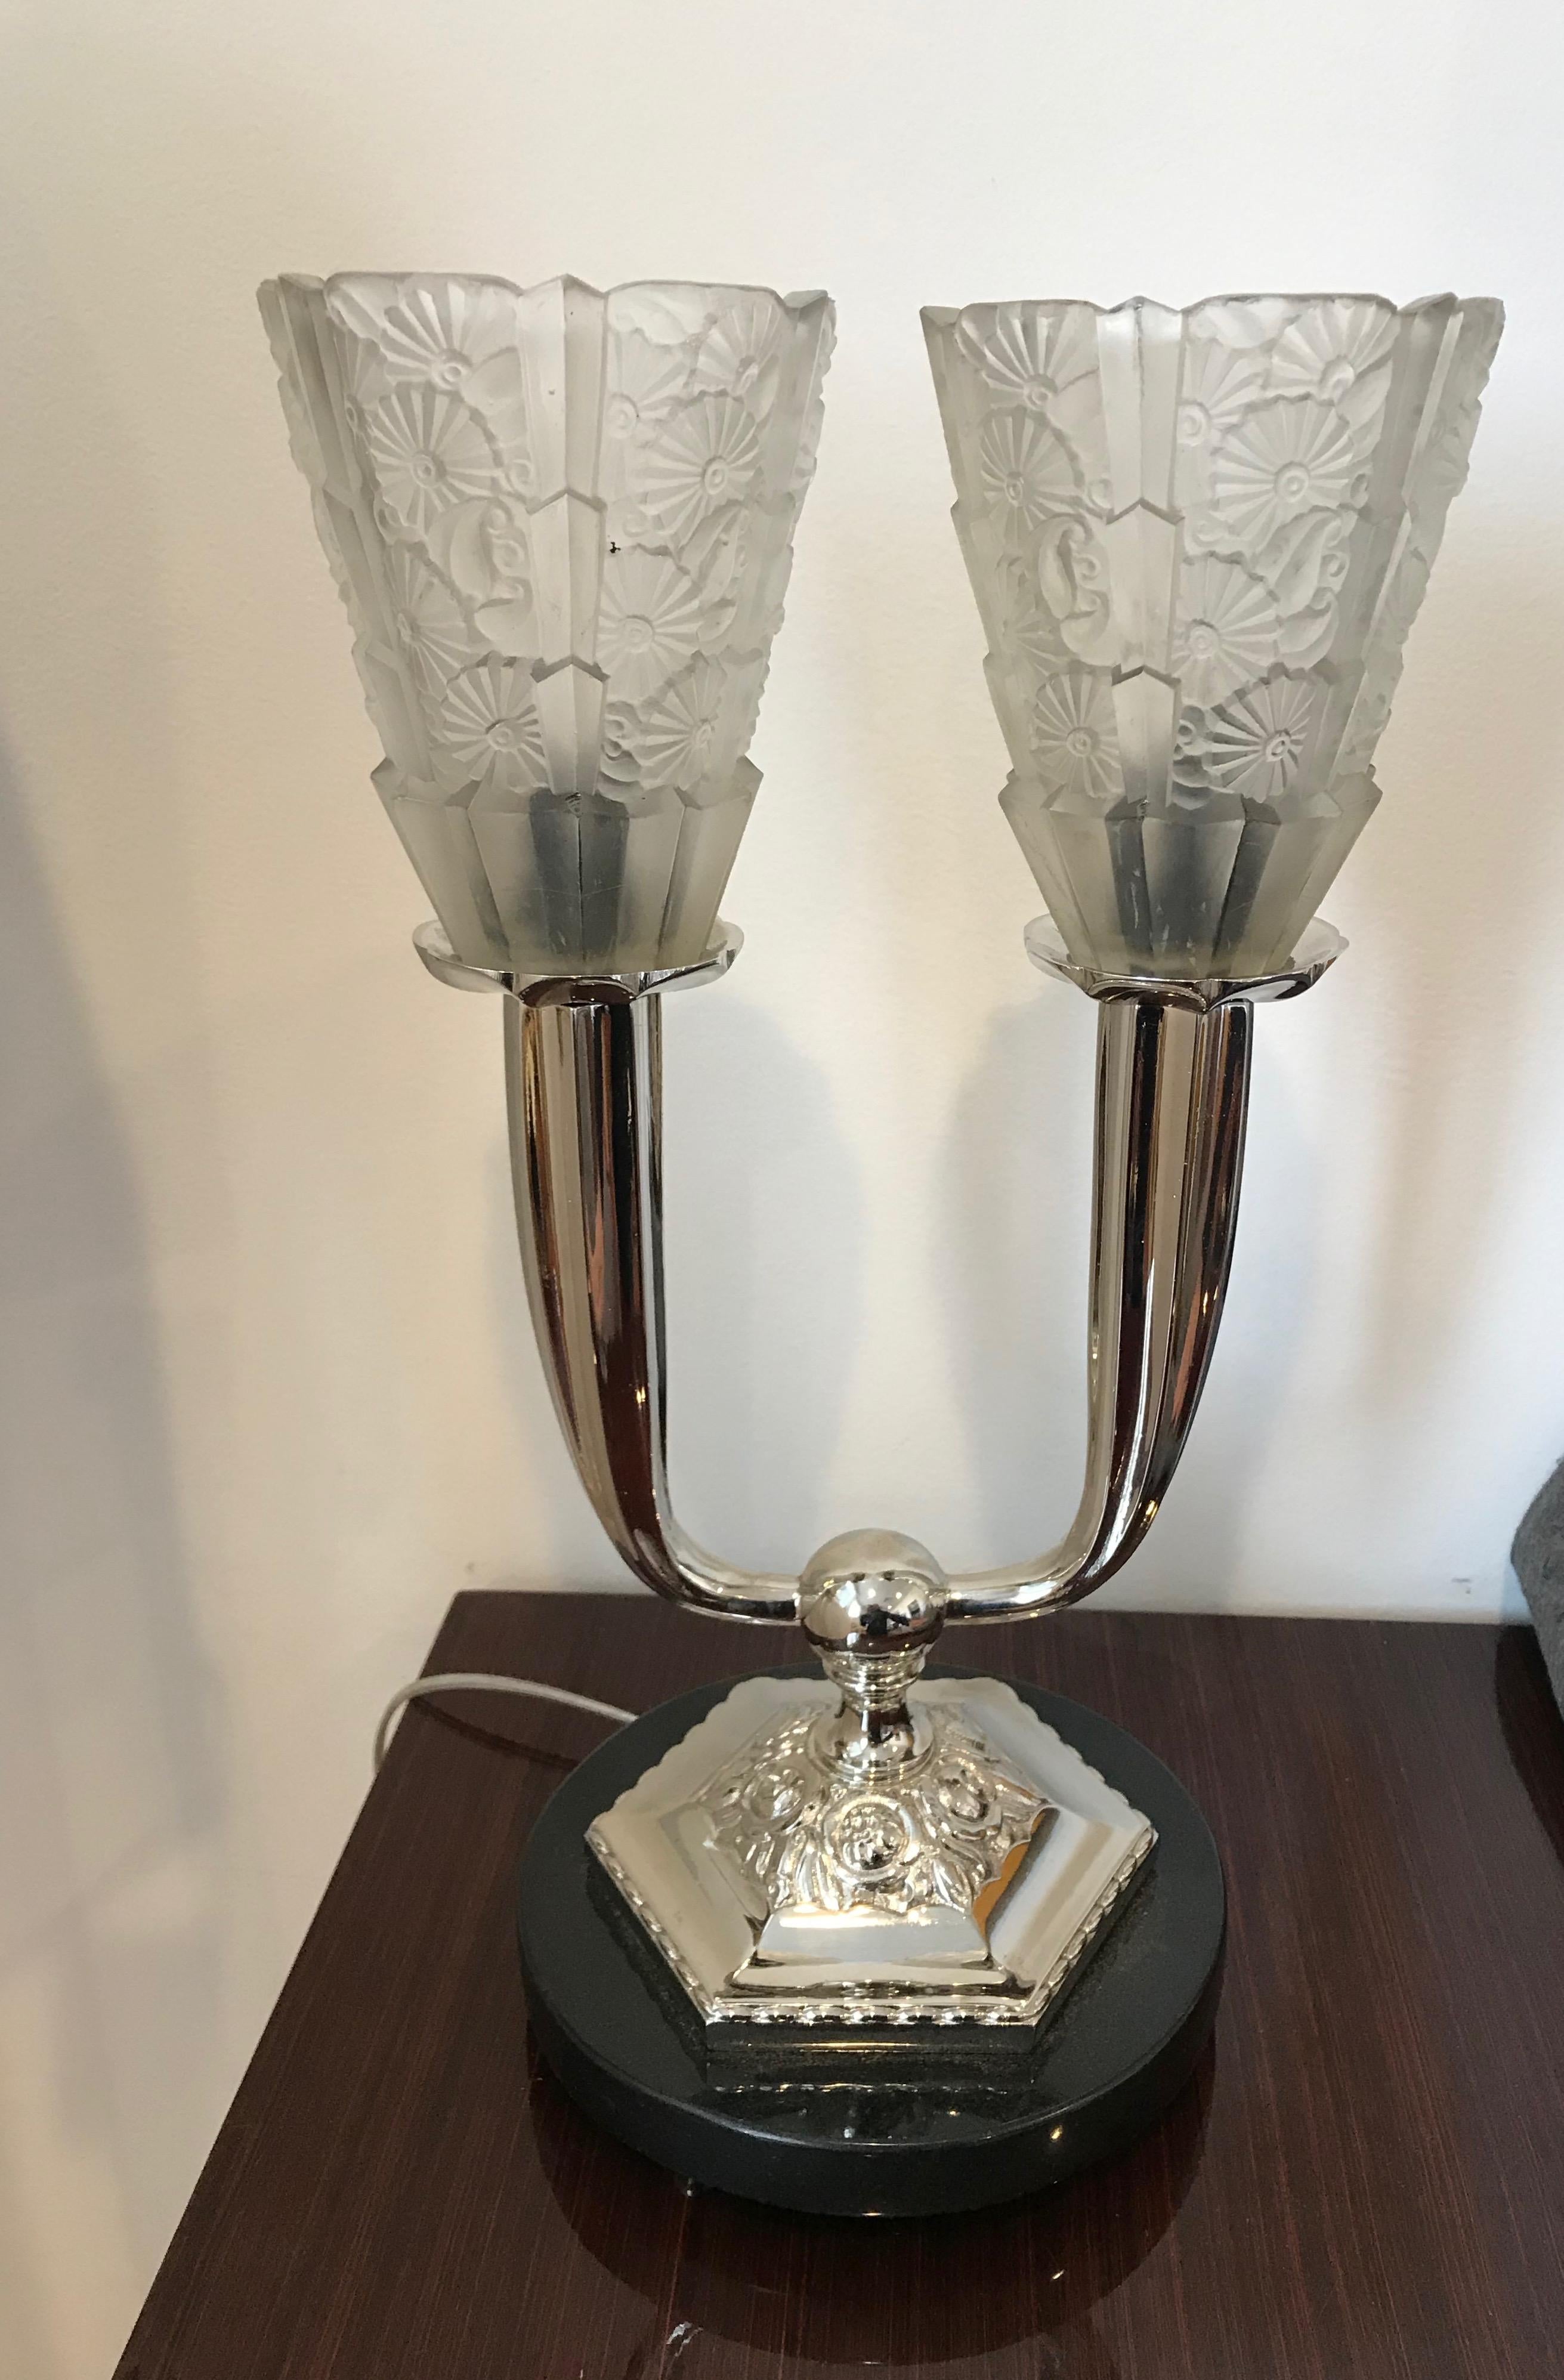 French Art Deco floral table lamp. Two clear frosted floral glass shades held by polished nickel frame sitting on black marble base. Has been re plating in polished nickel and re wired for American use. Each shade takes one candelabra socket. For a